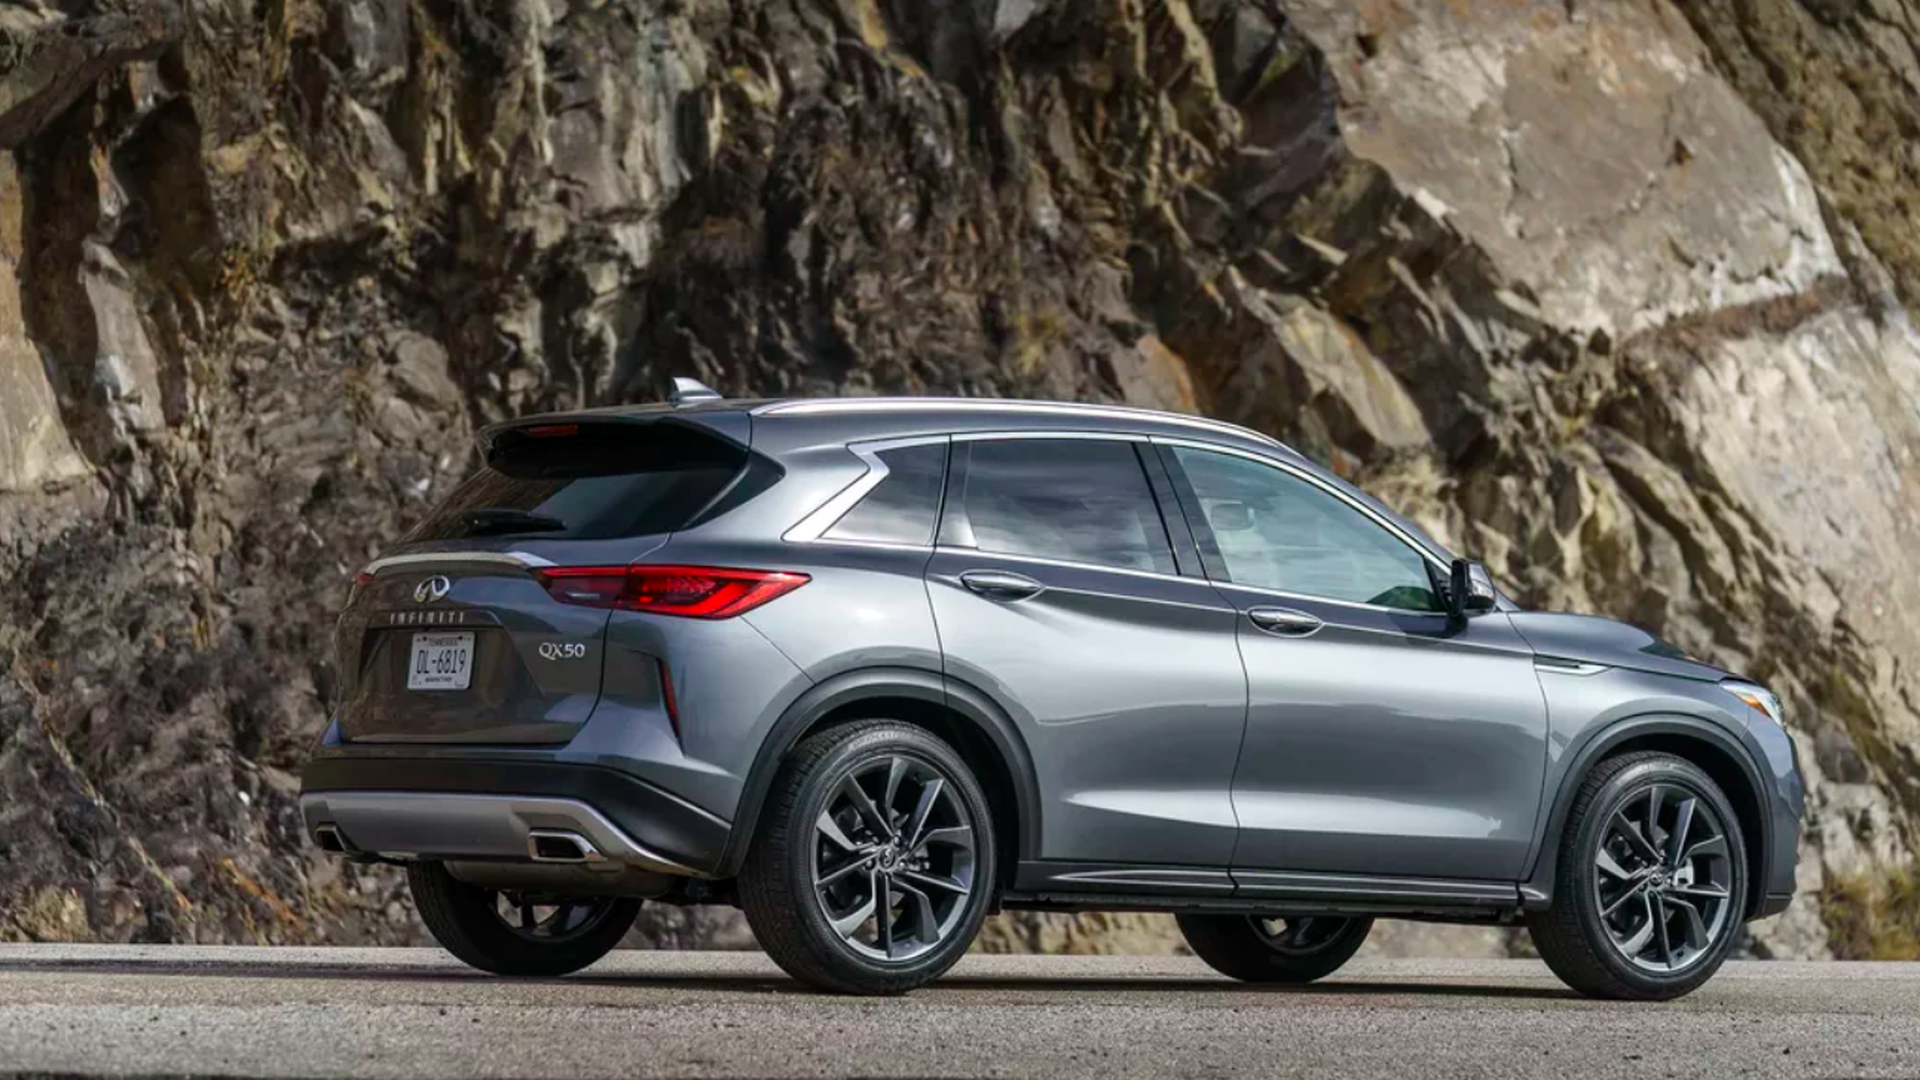 In this image, the Infiniti Qx50 is seen while driving on a mountainous pass.